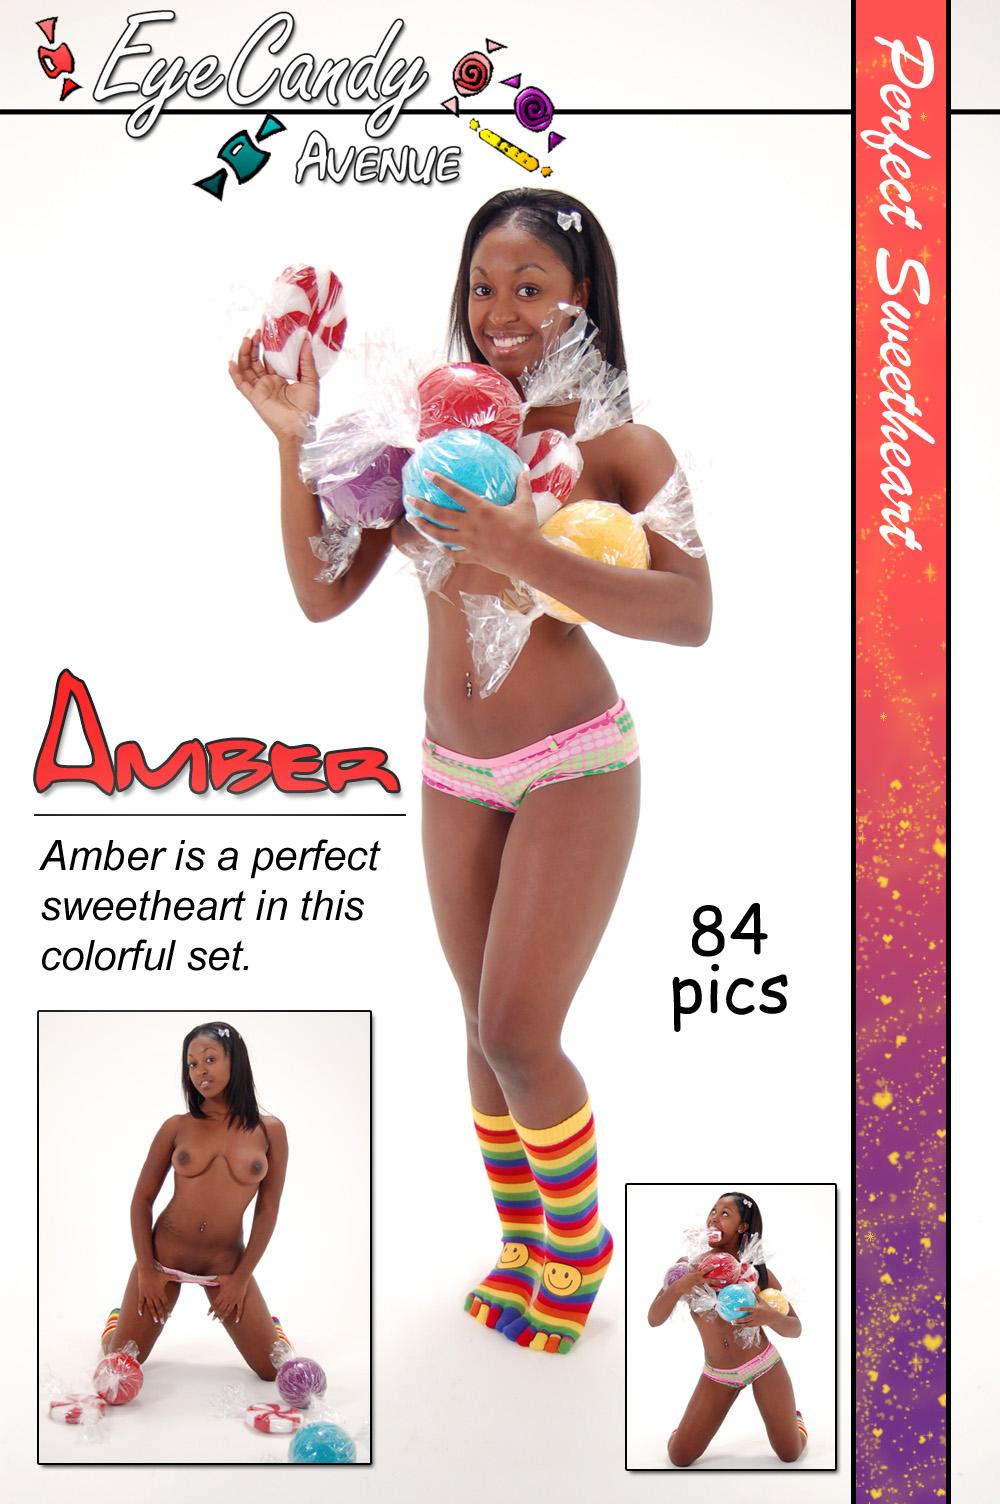 Amber posing naked with colorful candy #53086331